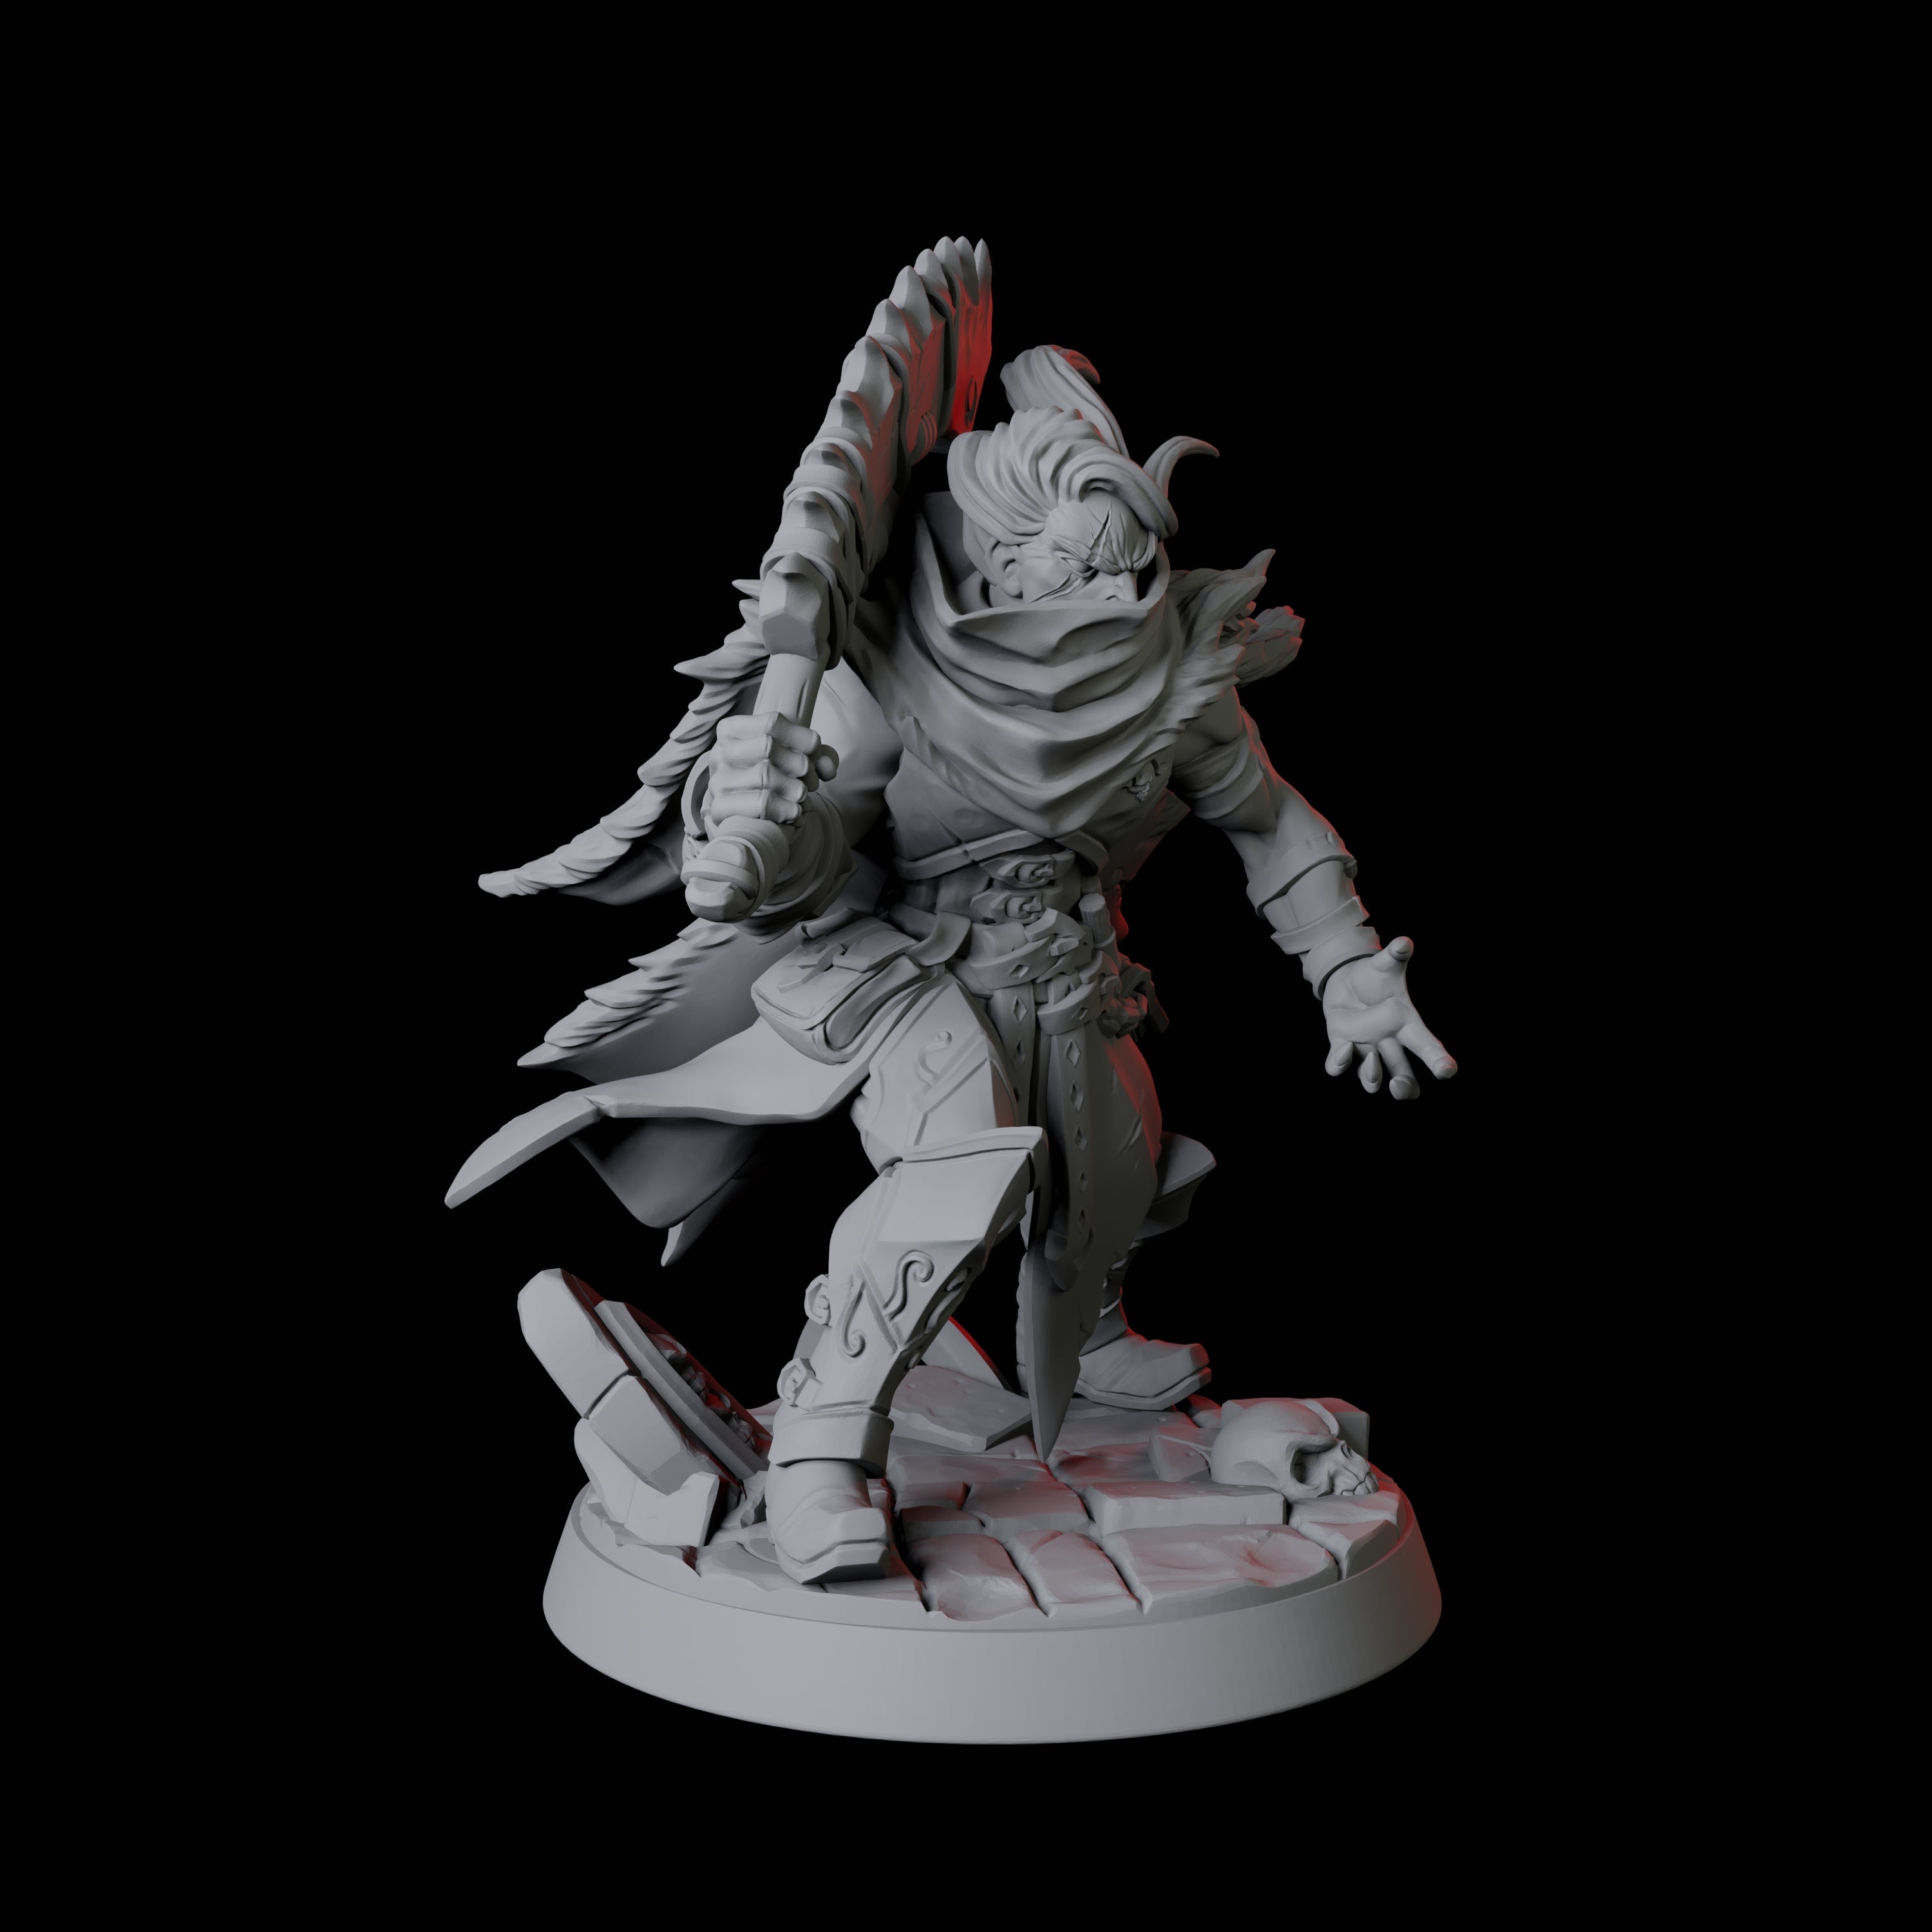 Vampire Hunter Leader Miniature for Dungeons and Dragons, Pathfinder or other TTRPGs